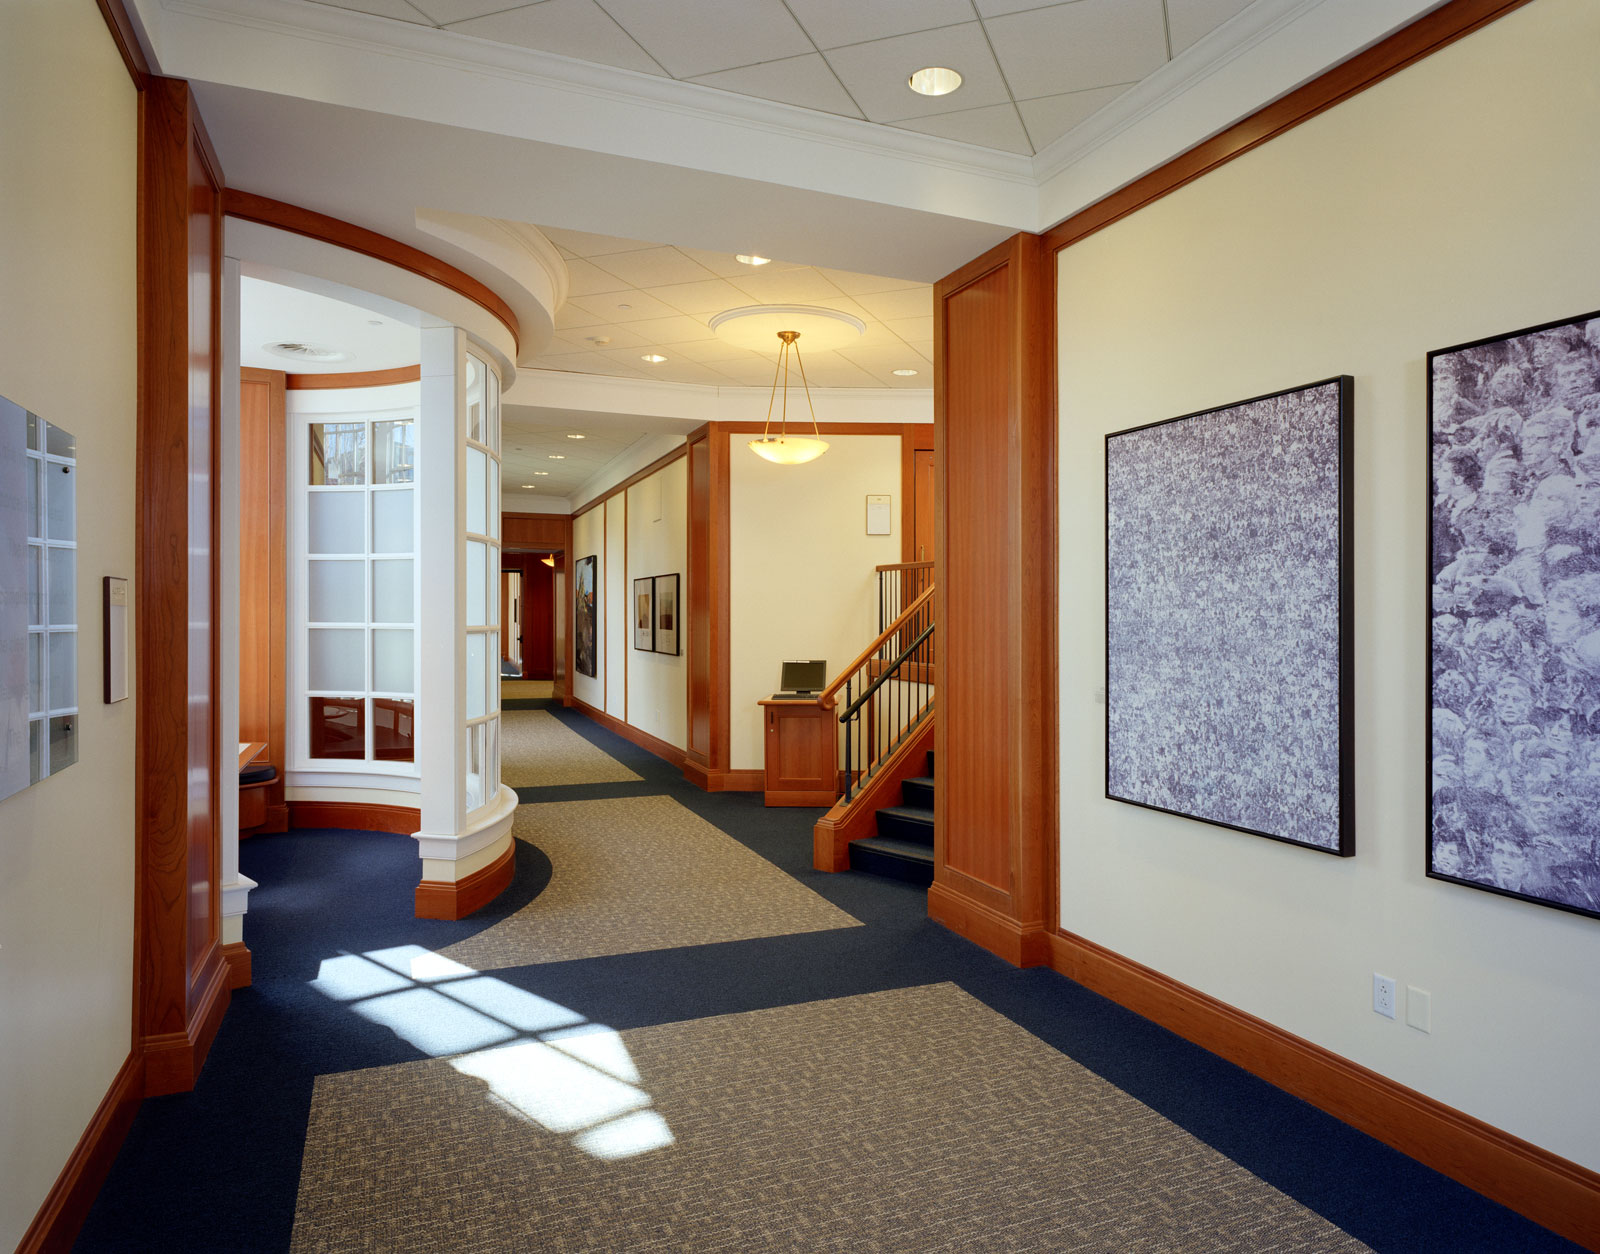 A beautiful curved wall enhances this space. The quality and craftsmanship we put in our trim and wall panels will stand the test of time at Harvard.